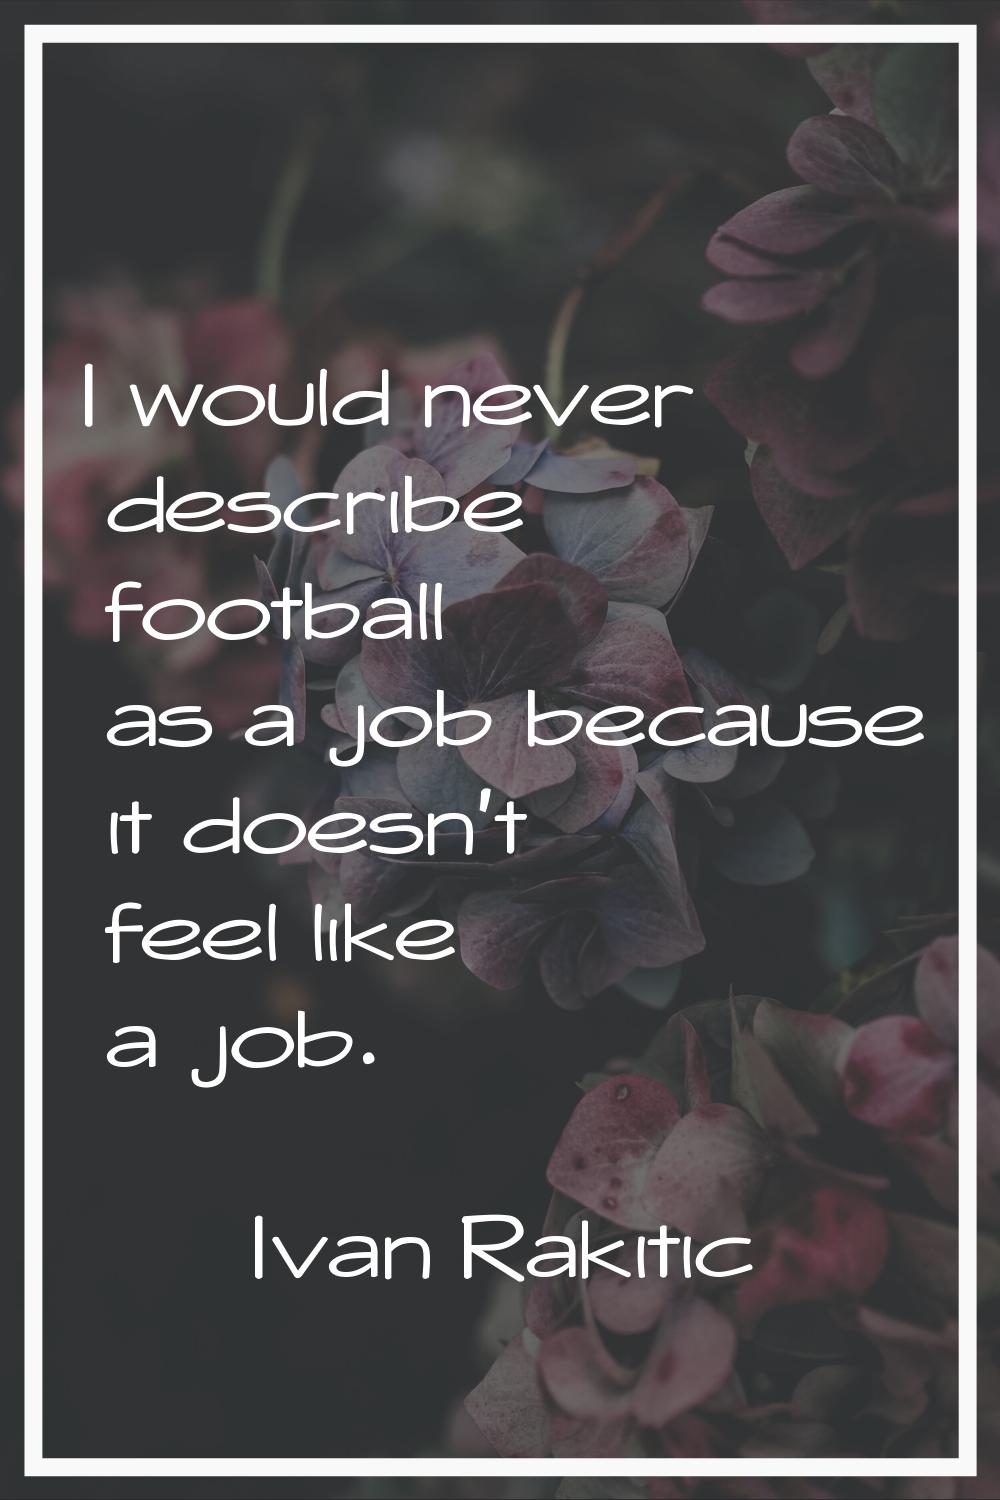 I would never describe football as a job because it doesn't feel like a job.